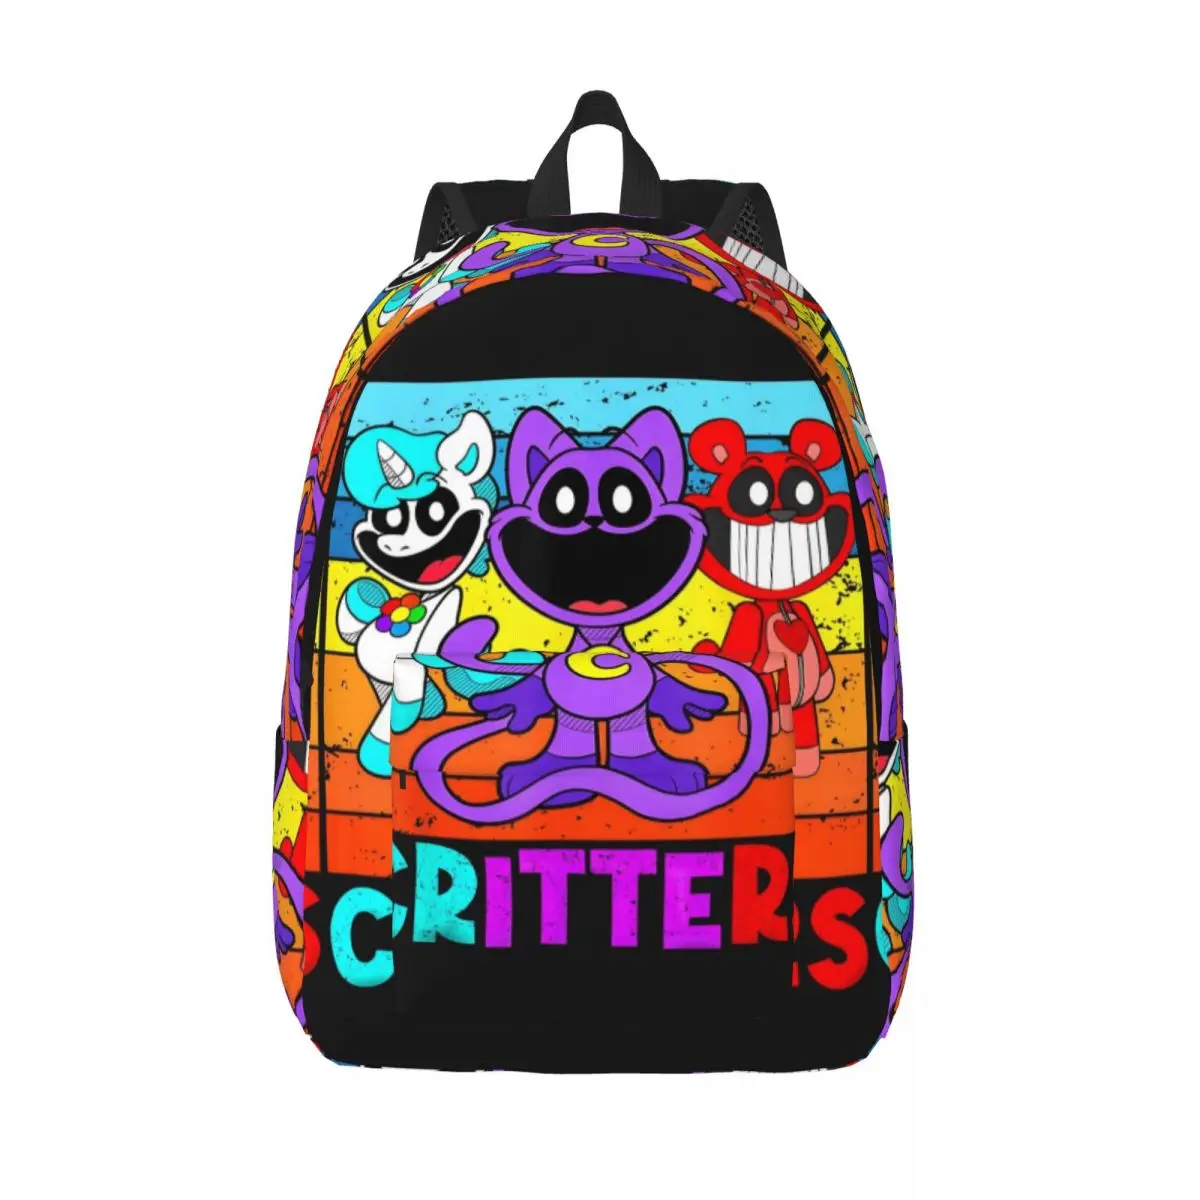 Funny Dogday Backpack Girl Animals Large Backpacks Polyester Streetwear School Bags Travel Colorful Rucksack